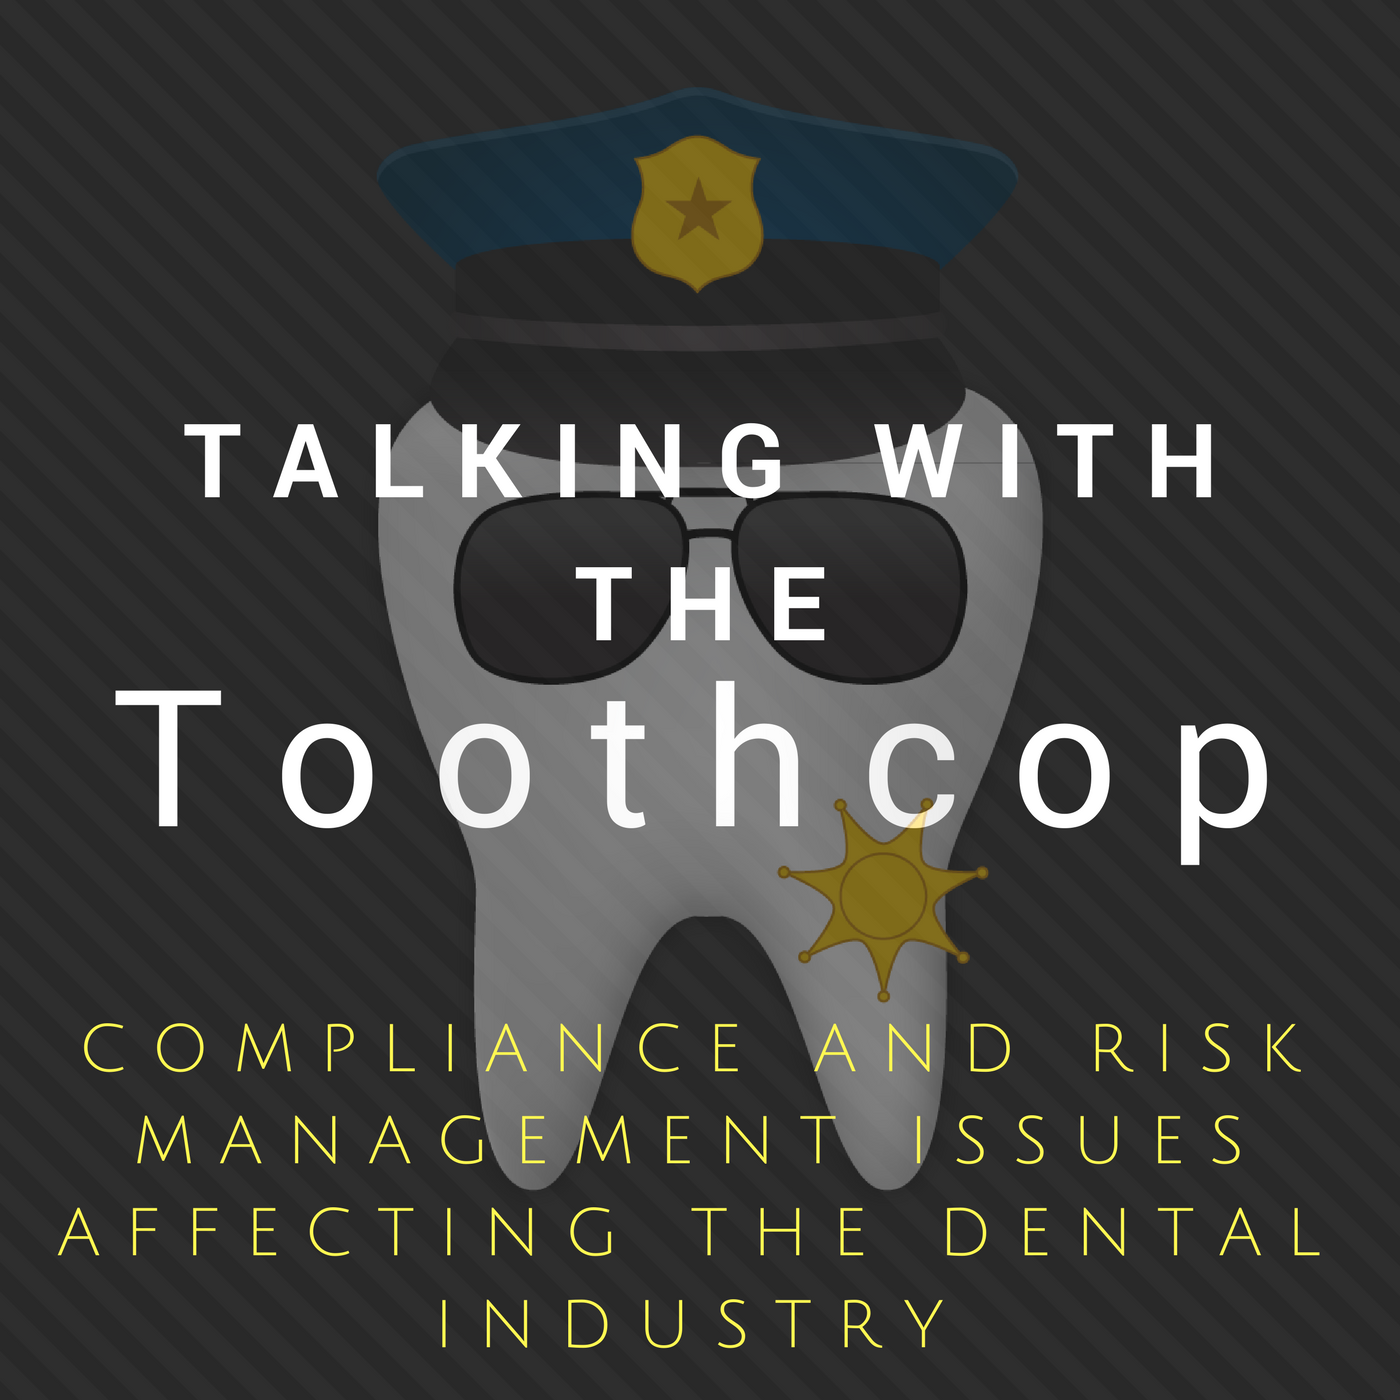 The Importance of Compliance and Risk Management in your Dental Practice - Linda Harvey